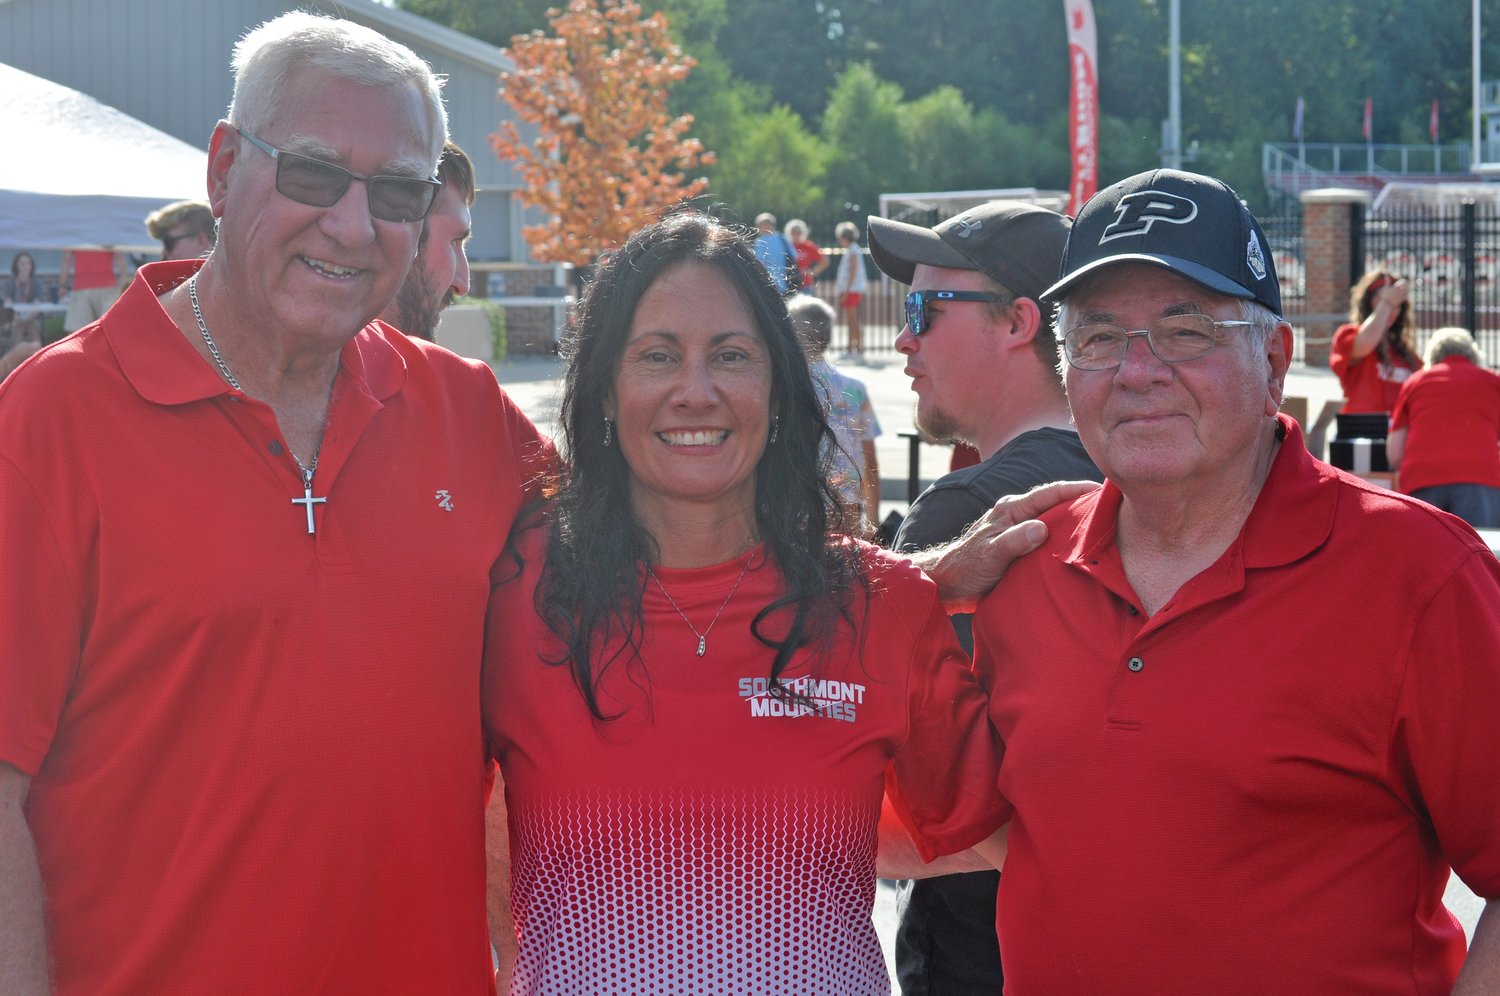 Retired Southmont High School teachers Ron Hess, left, and Rich Clouse with alumna Amanda Douglas at the school